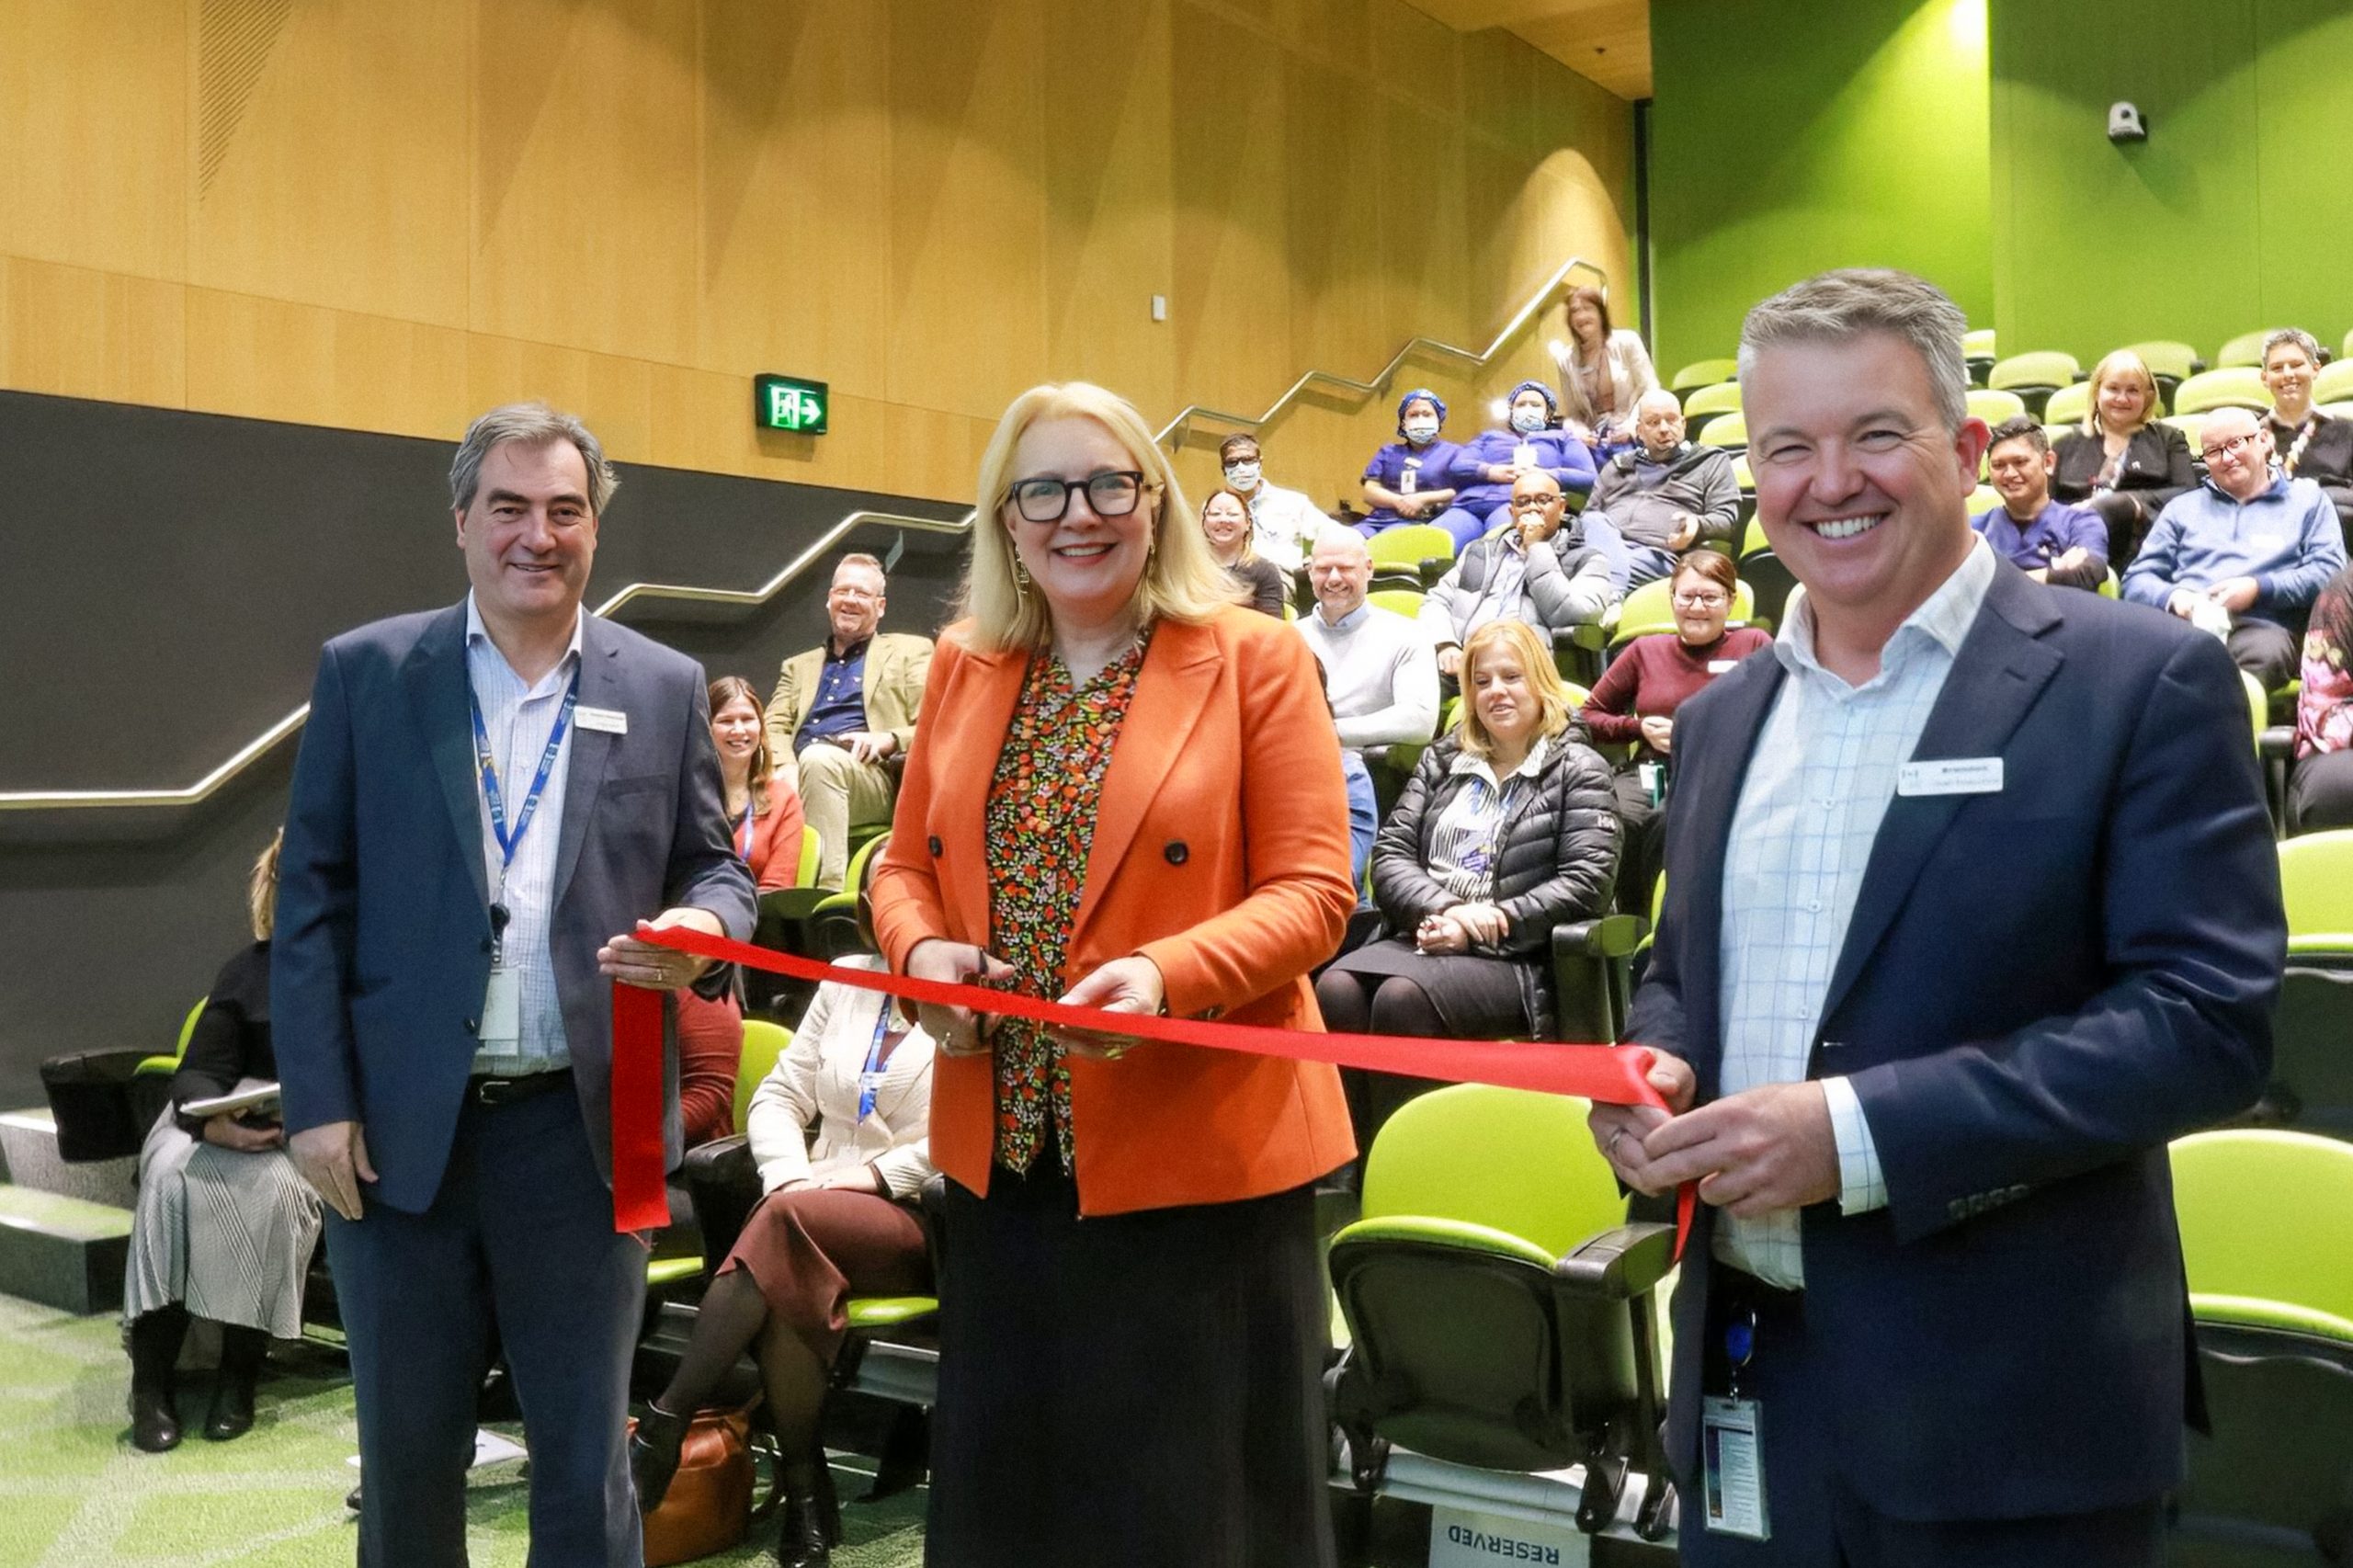 Dr Catherine Brown OAM cuts the ribbon to officially open the Martin Family Auditorium at The Royal Victorian Eye and Ear Hospital. The ribbon is held on either side by Brendon Gardner (hospital CEO) and Danny Mennuni 